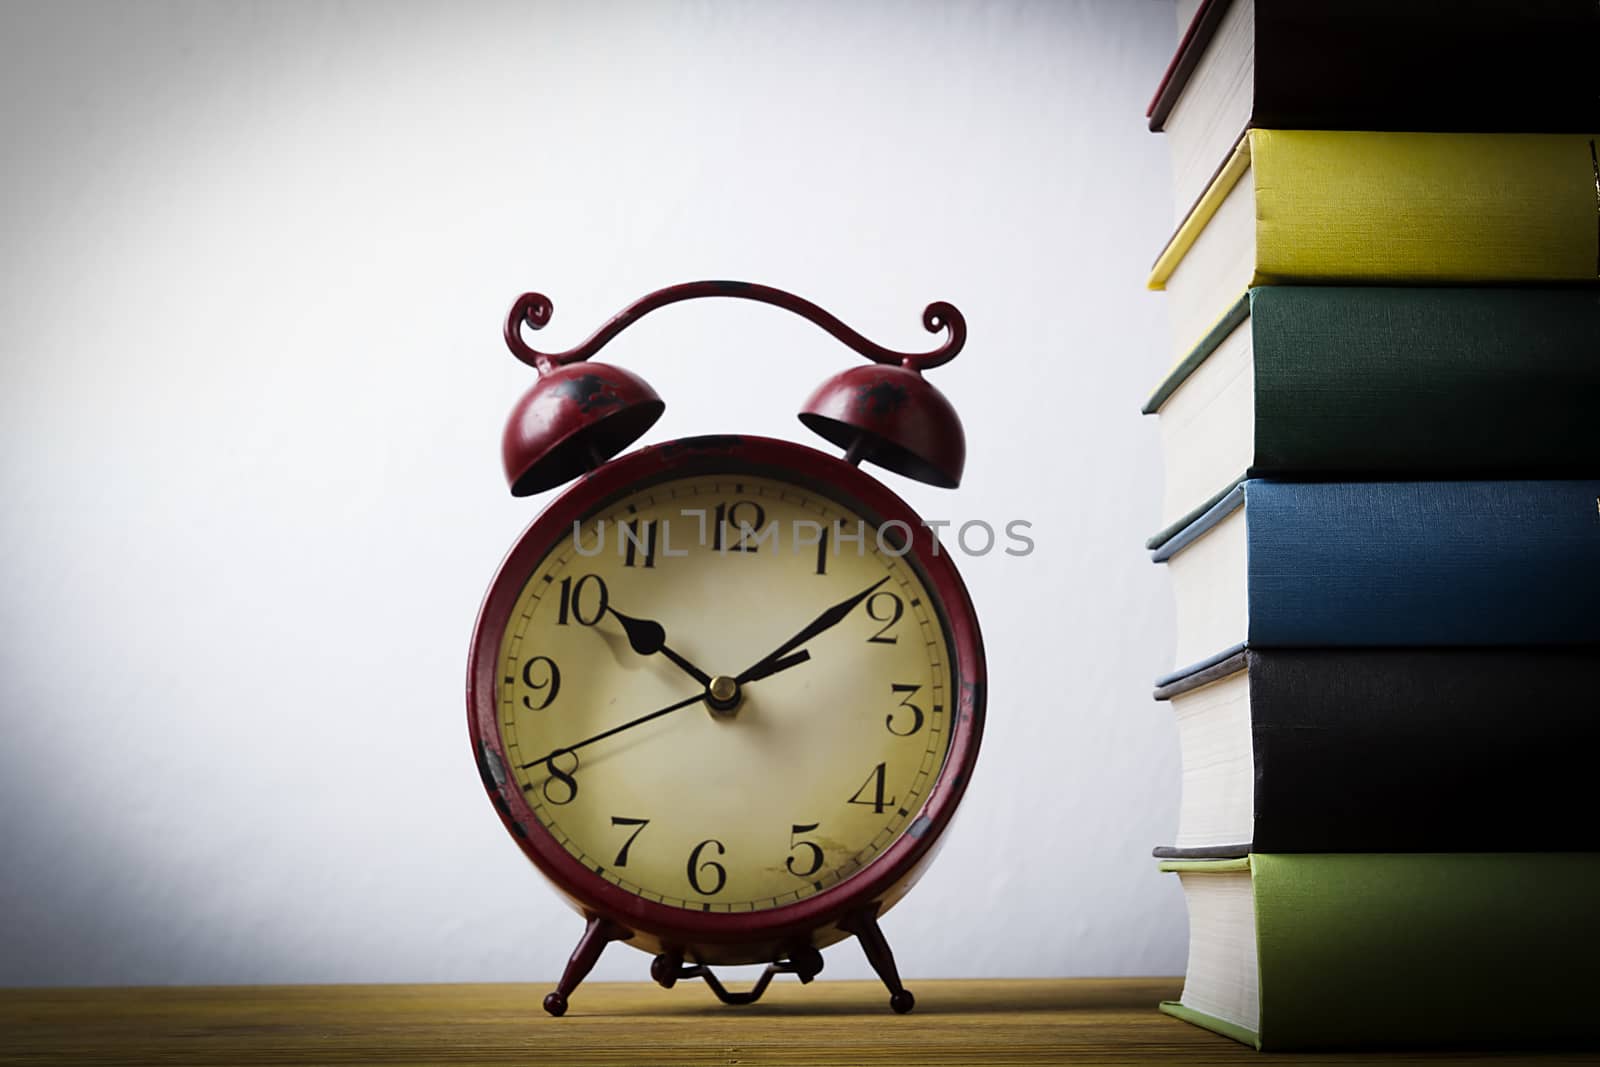 Stack of books and an alarm clock on a wooden table